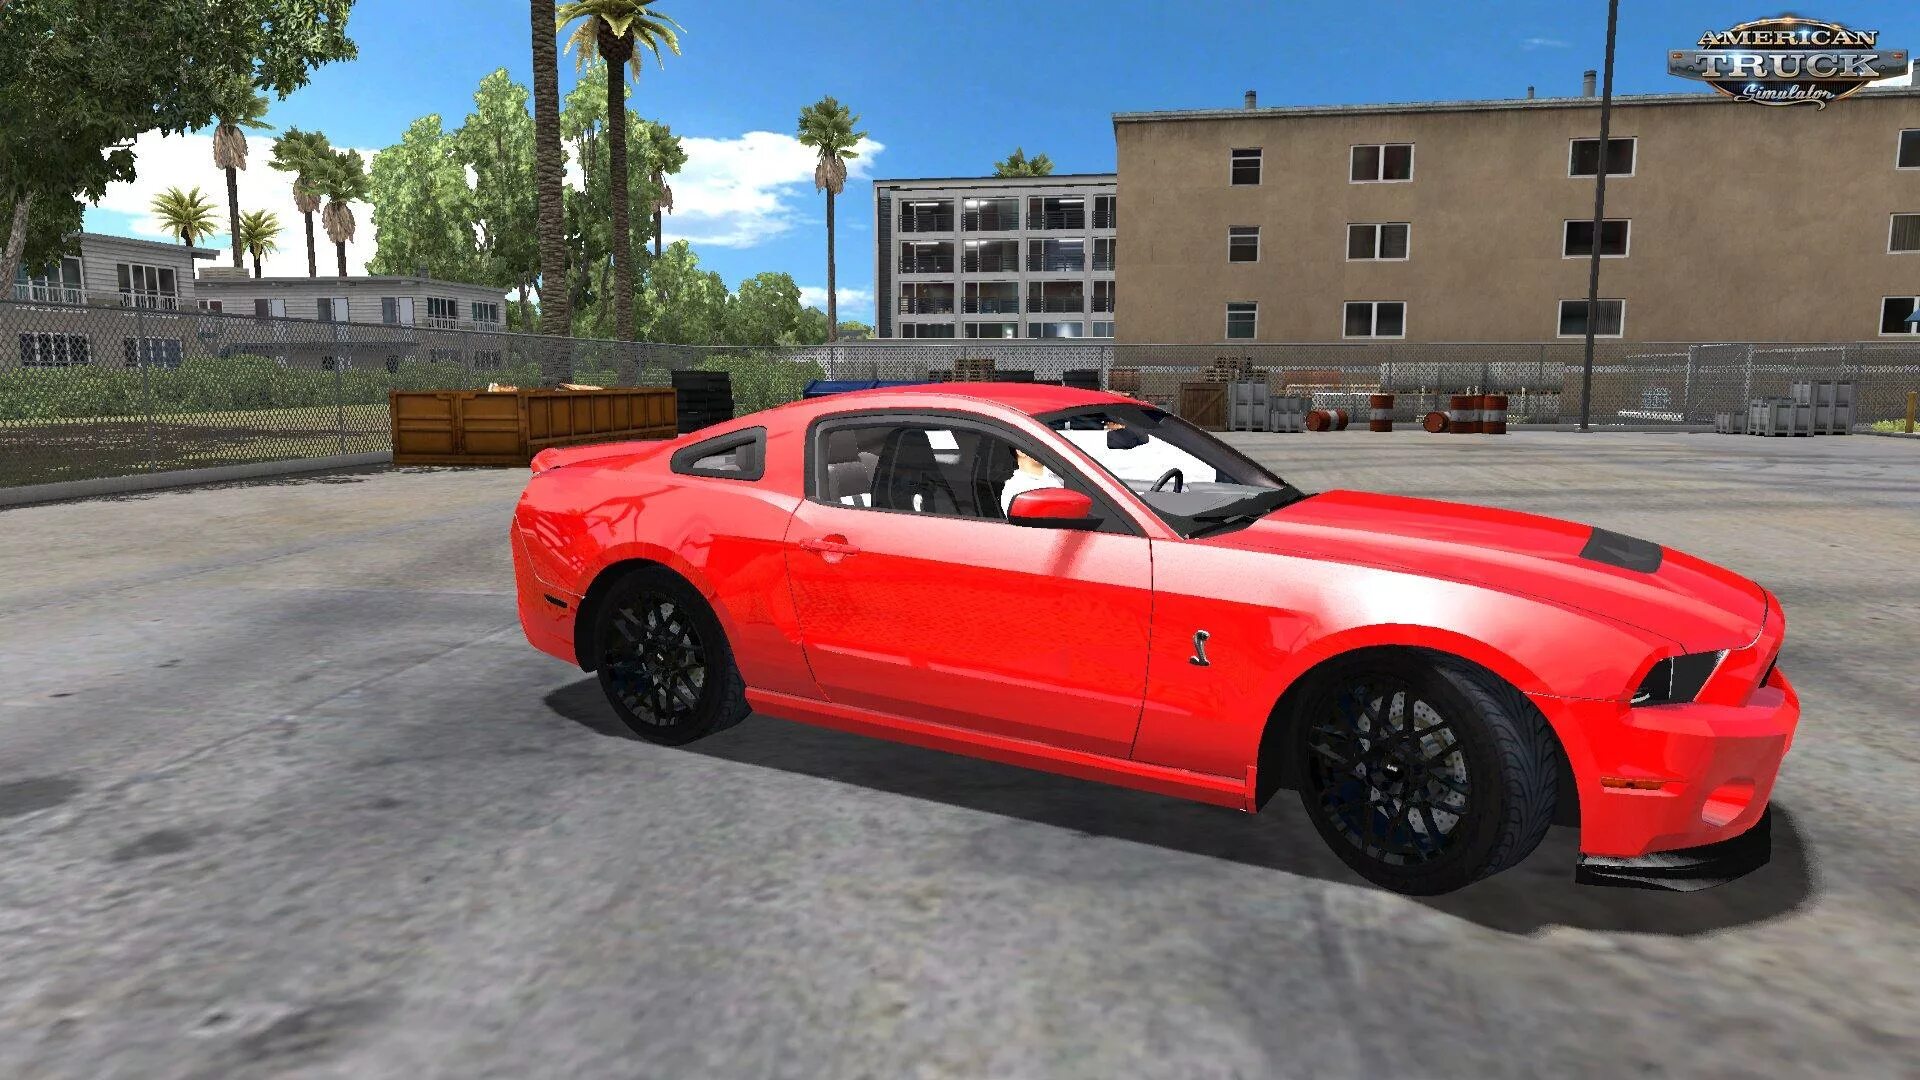 Ford Mustang gt500 Shelby BEAMNG Drive. American Truck Simulator Ford Mustang. Shelby gt 500 самп. Мод на ATS Форд.